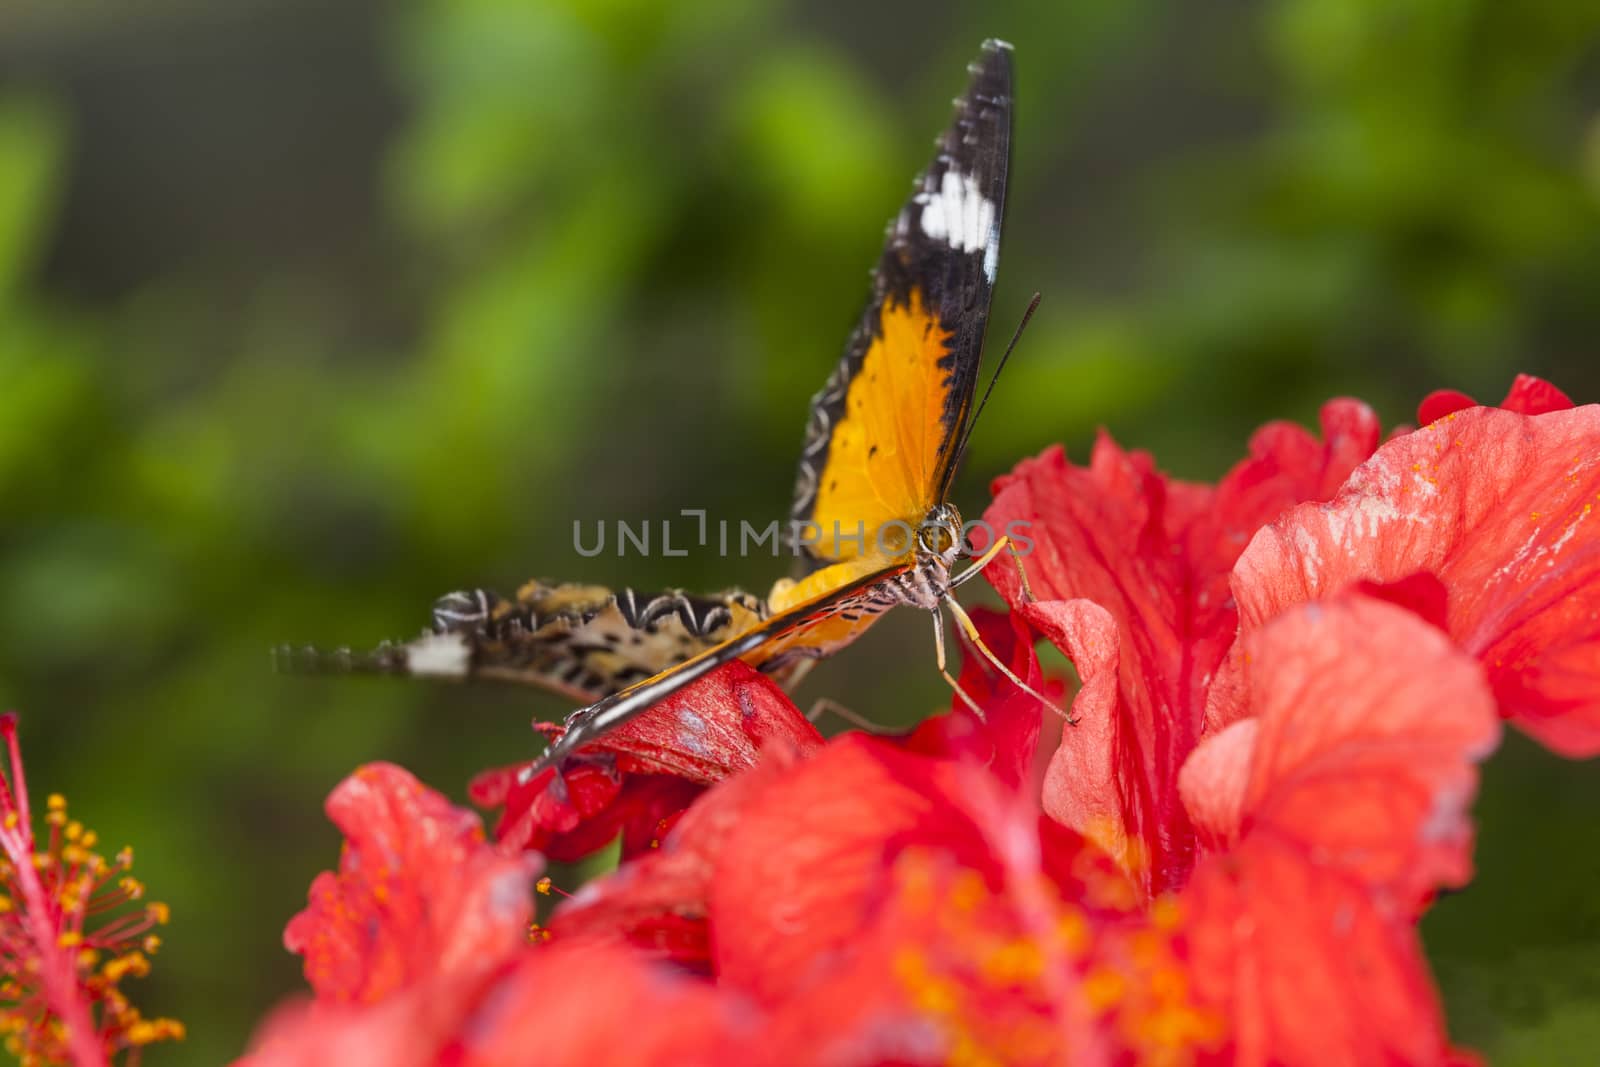 Exotic Butterfly on flowers, beautiful butterfly and flower in the garden of tropical Bali island, Indonesia. Close Up butterfly on flower.